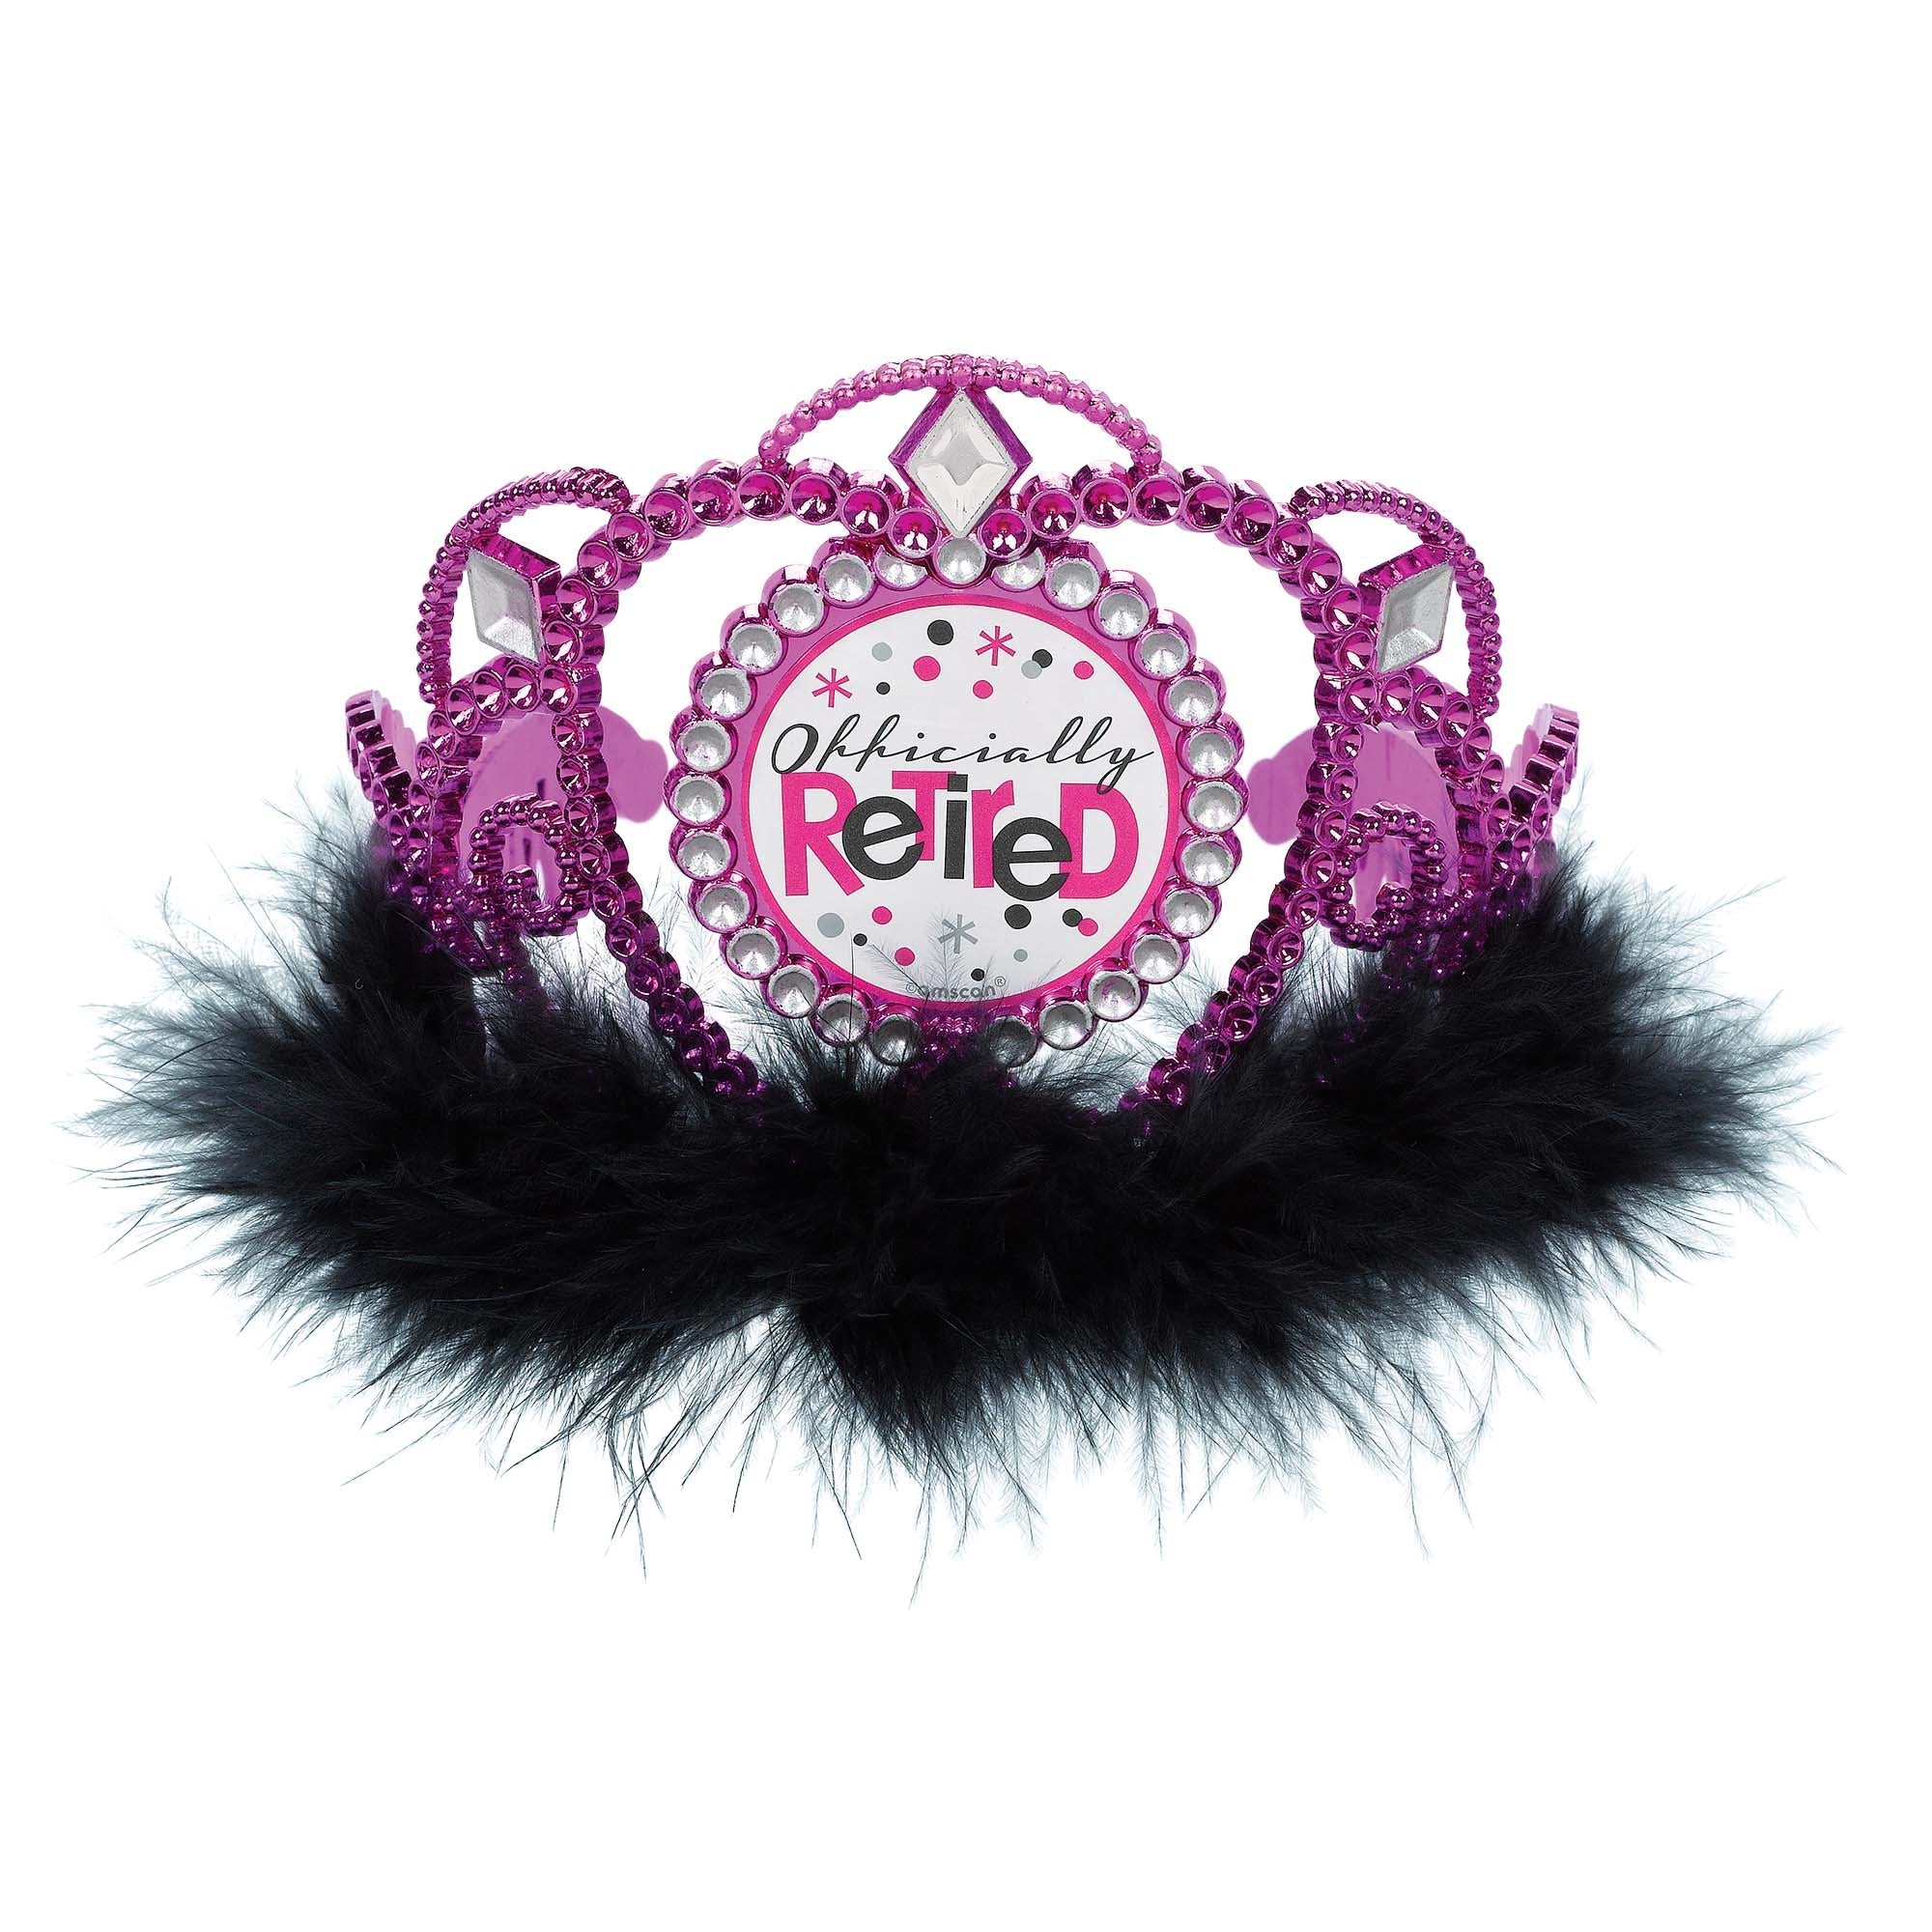 Officially Retired Pink Electroplated Marabou triimed 4 3/4" x 5" Tiara